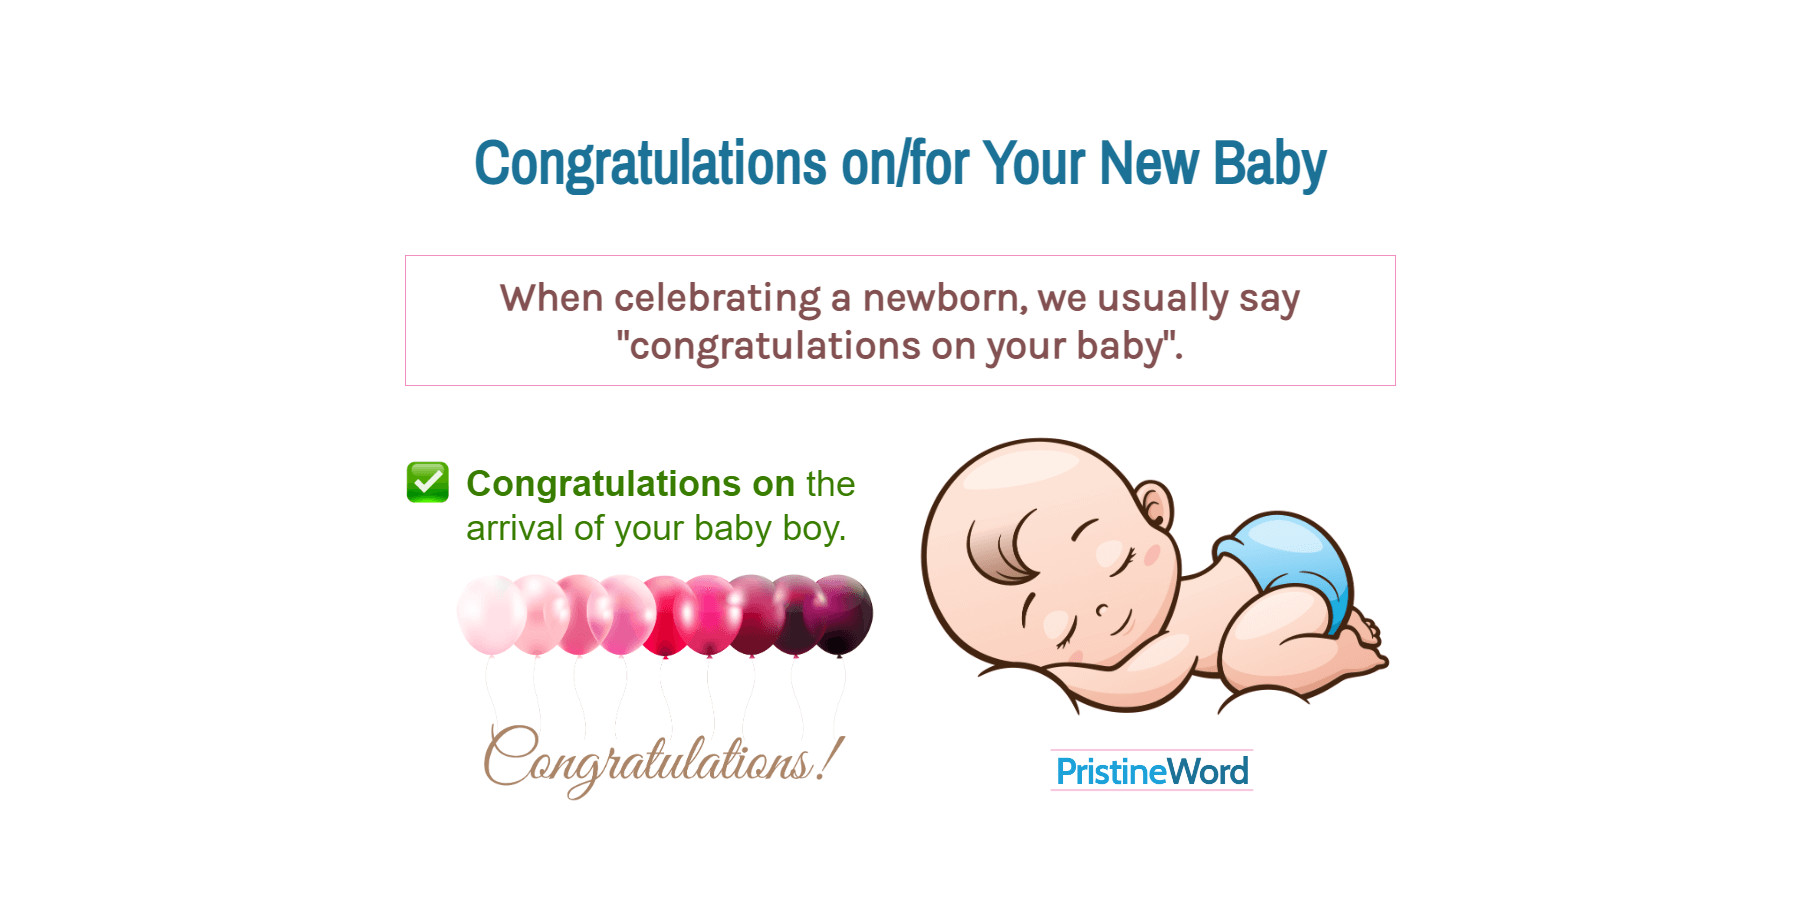 Congratulations on/for Your Baby (Prepositions)